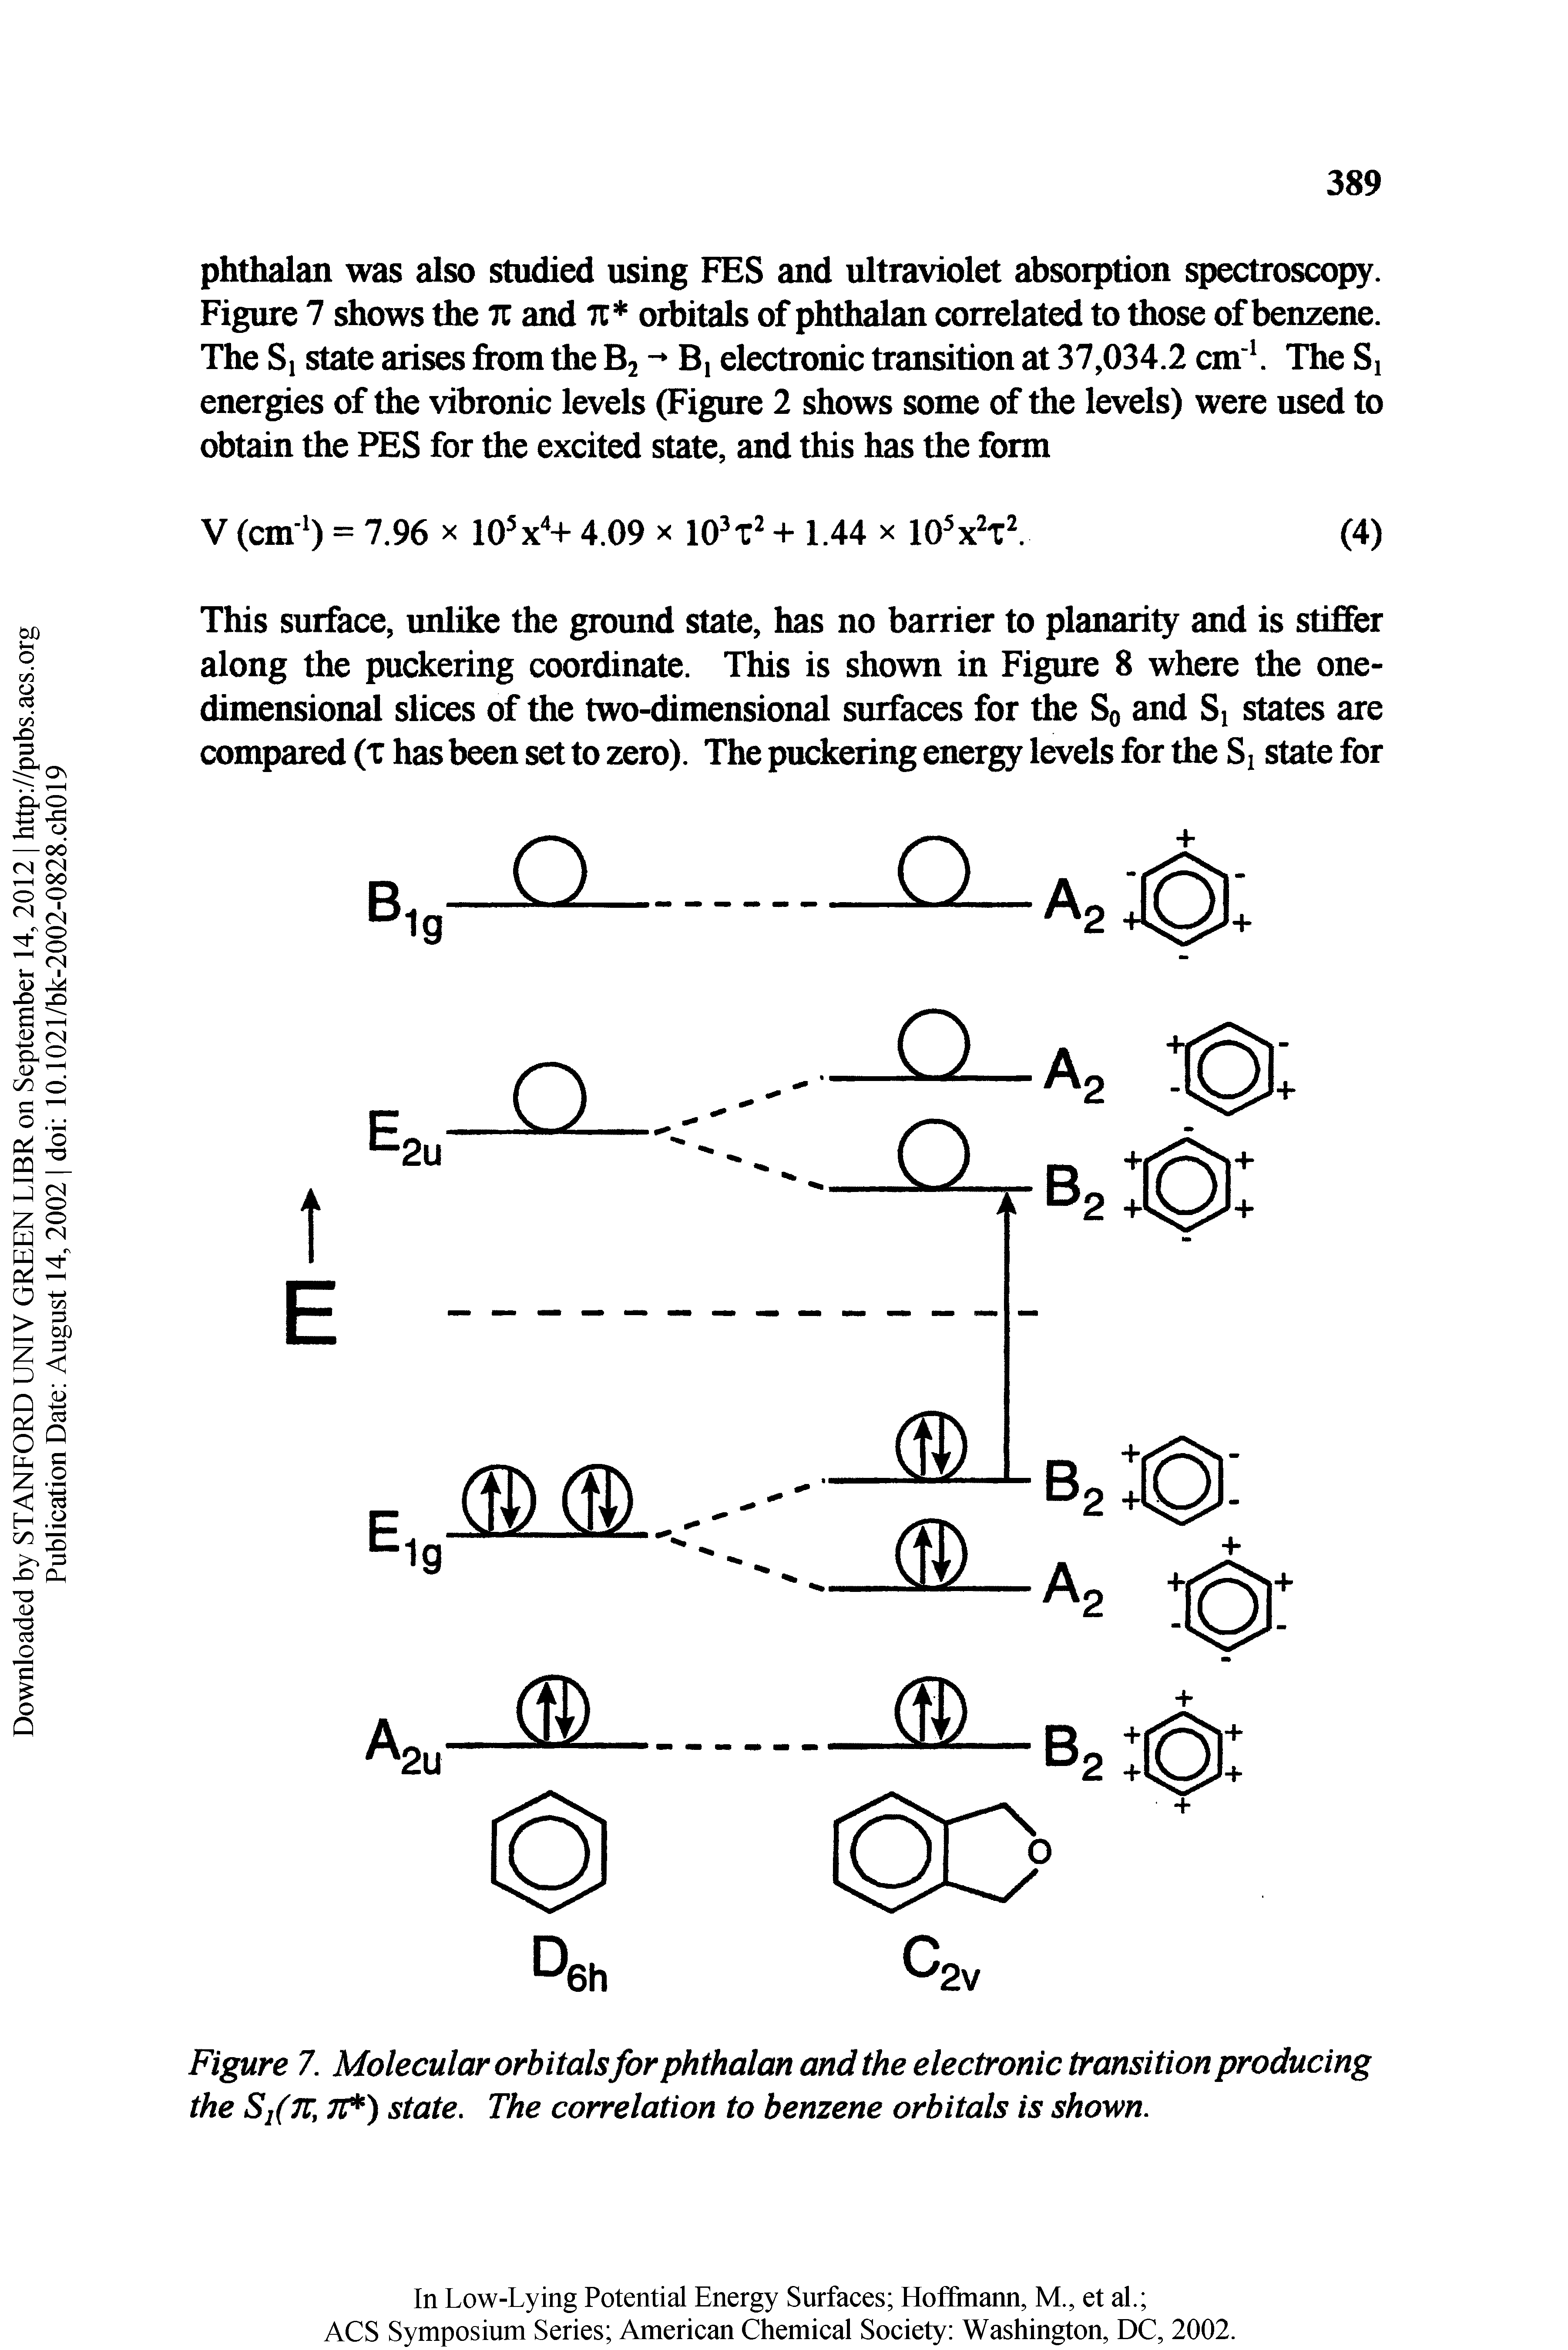 Figure 7. Molecular orbitals for phthalan and the electronic transition producing the Sj(K, 71 ) state. The correlation to benzene orbitals is shown.